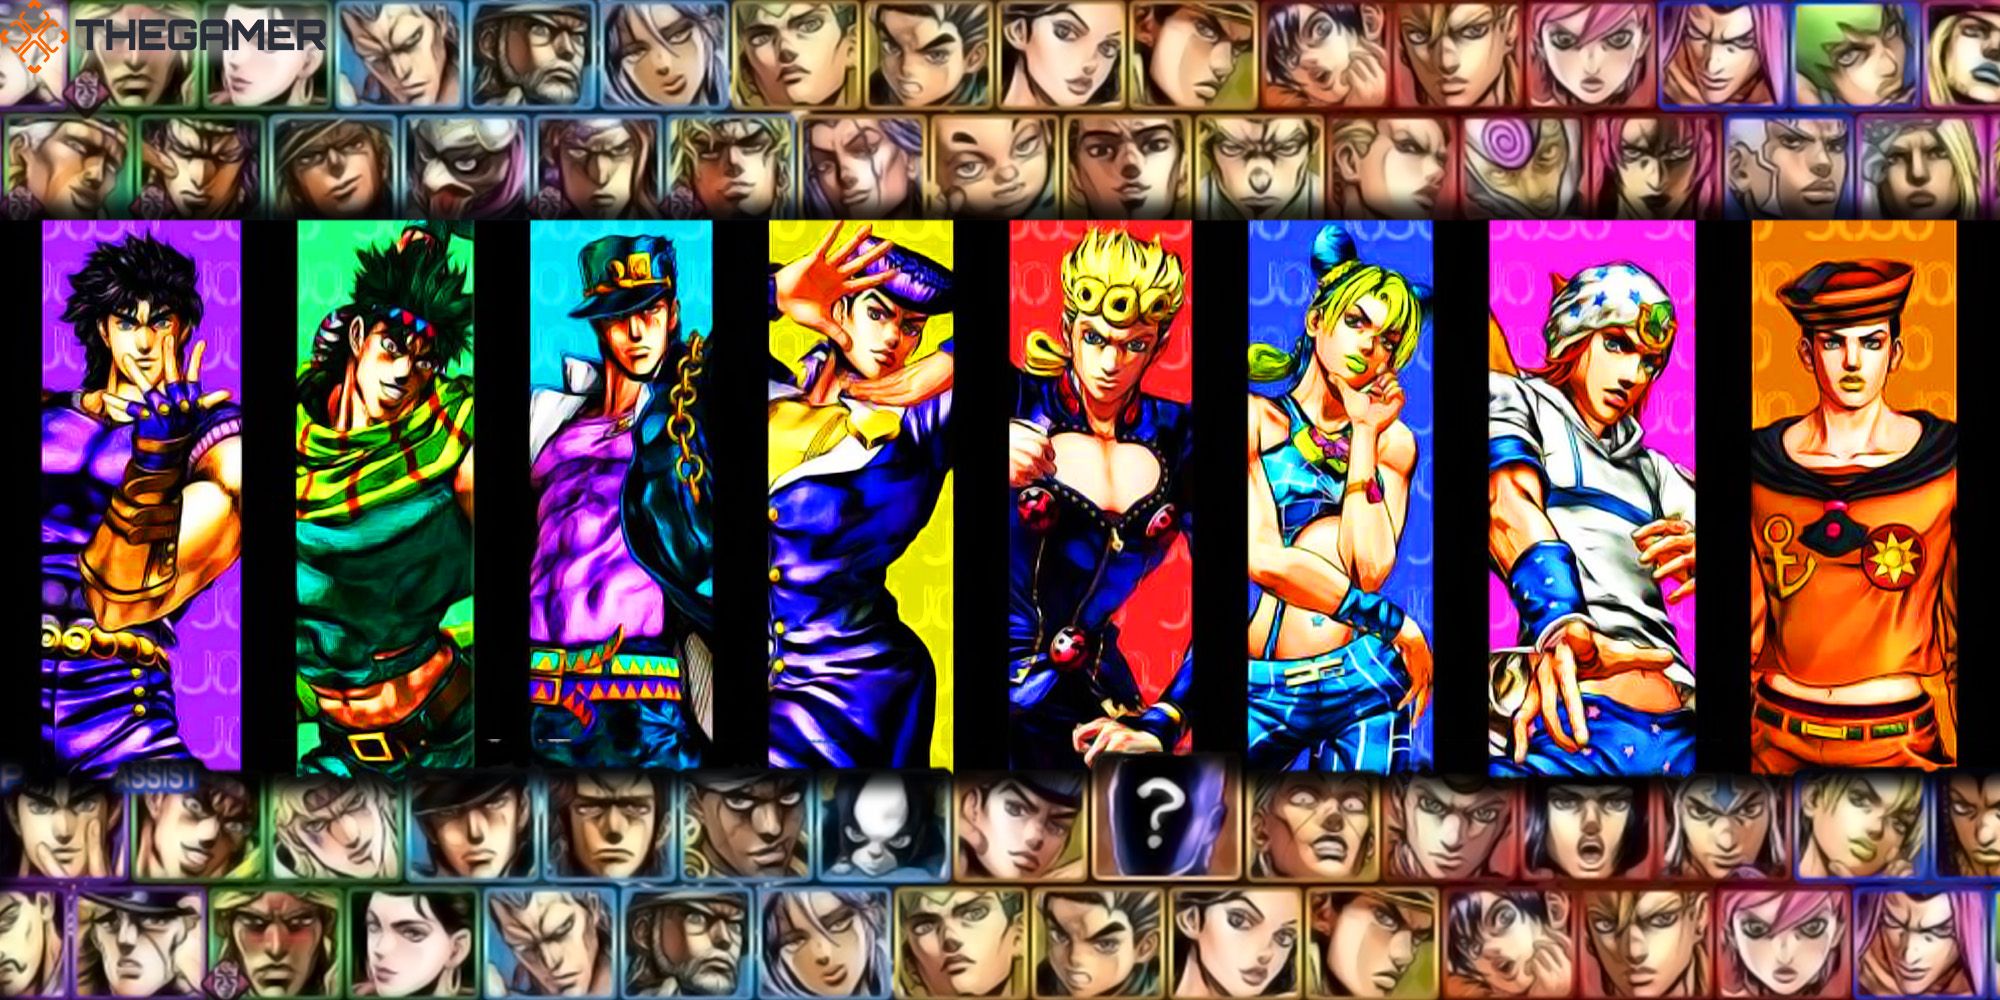 The eight Jojos from the Jojo's Bizarre Adventure manga stand against tiles featuring the cast of ASBR.